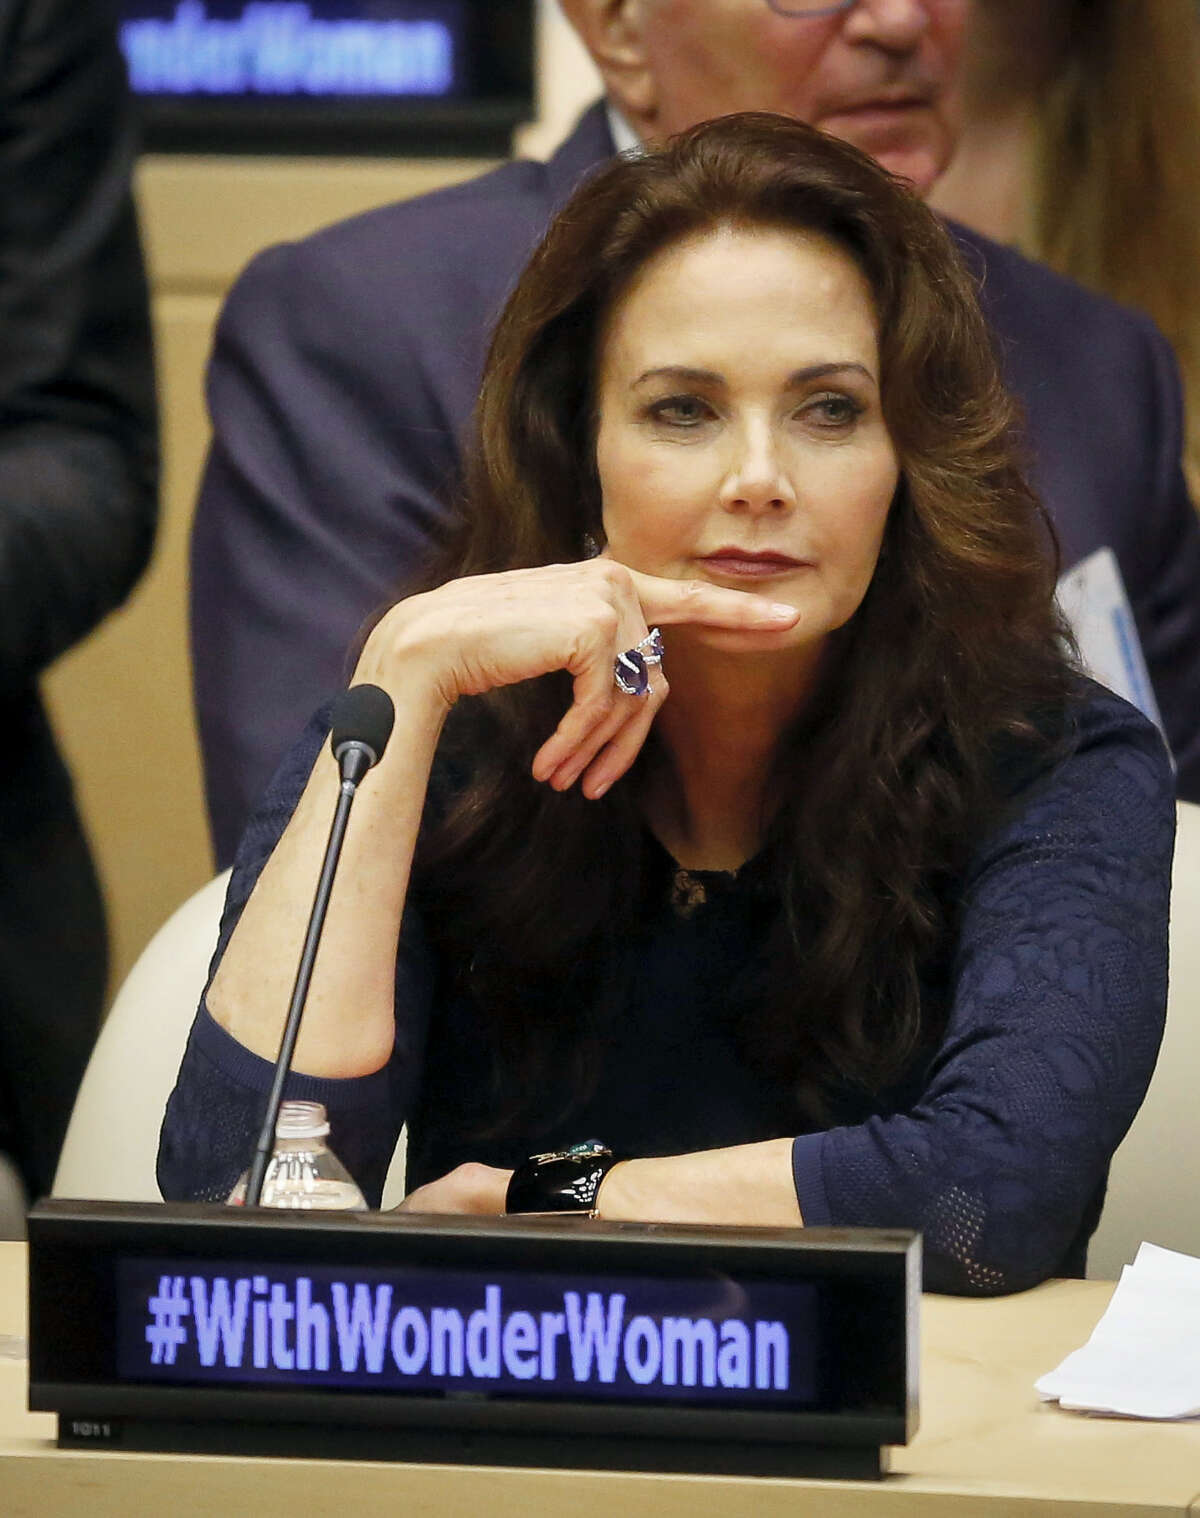 In this Oct. 21, 2016 photo, Lynda Carter, who played Wonder Woman on television, listens during a U.N. meeting to designate Wonder Woman as an “Honorary Ambassador for the Empowerment of Women and Girls,” at U.N. headquarters. Rhéal LeBlanc, the head of press and external relations, said Tuesday, Dec. 13, 2016 the appointment of Wonder Woman as an Honorary Ambassador for the Empowerment of Woman and Girls would end this week, a move that comes less than two months after a splashy ceremony at the U.N.